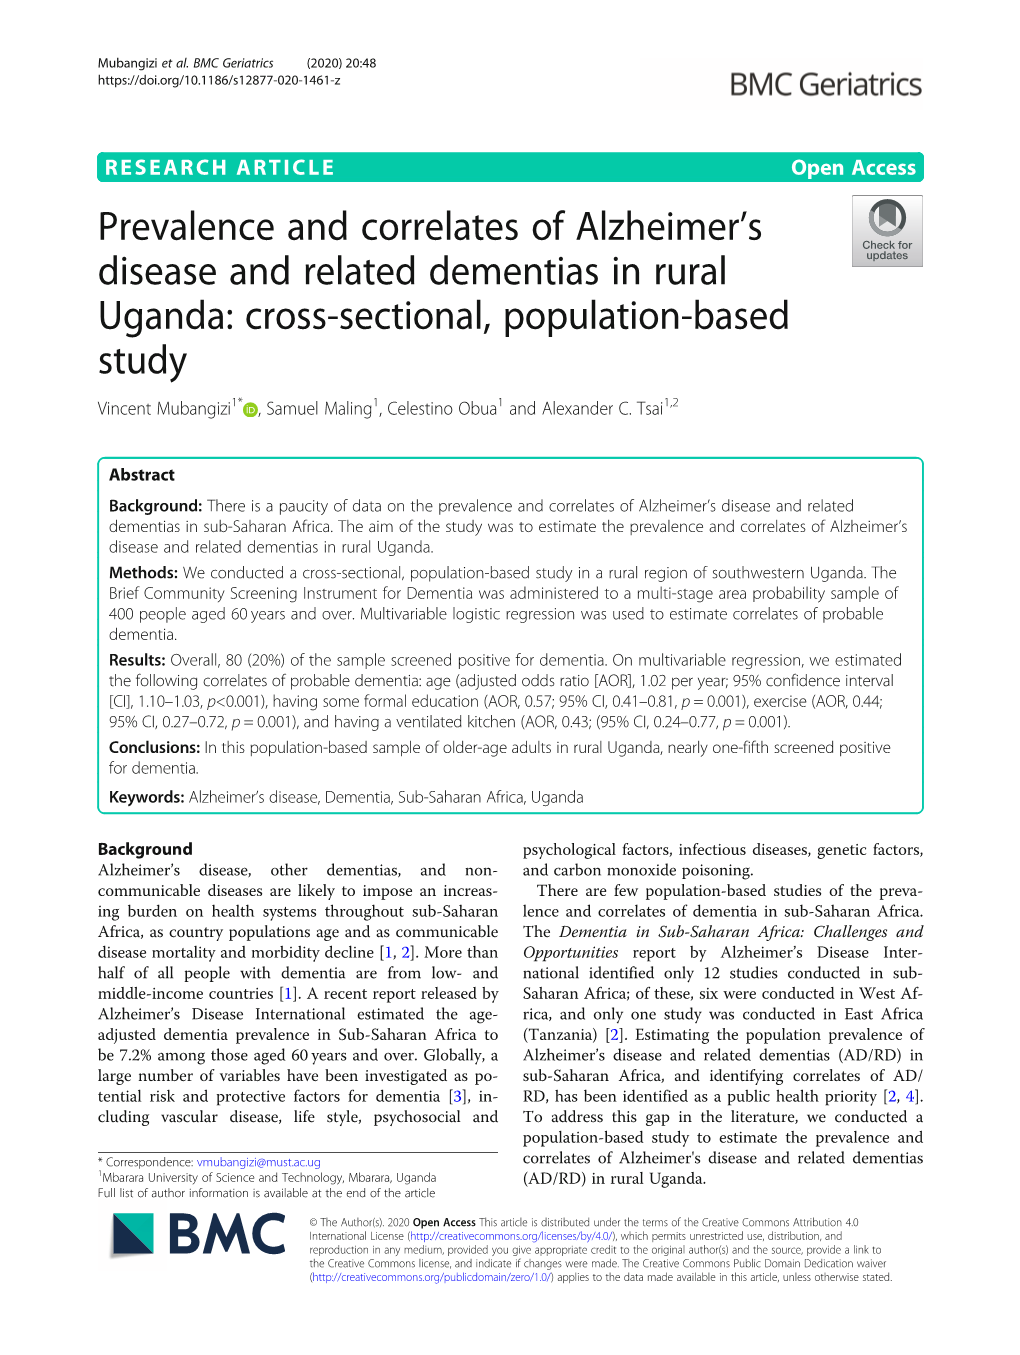 Prevalence and Correlates of Alzheimer's Disease and Related